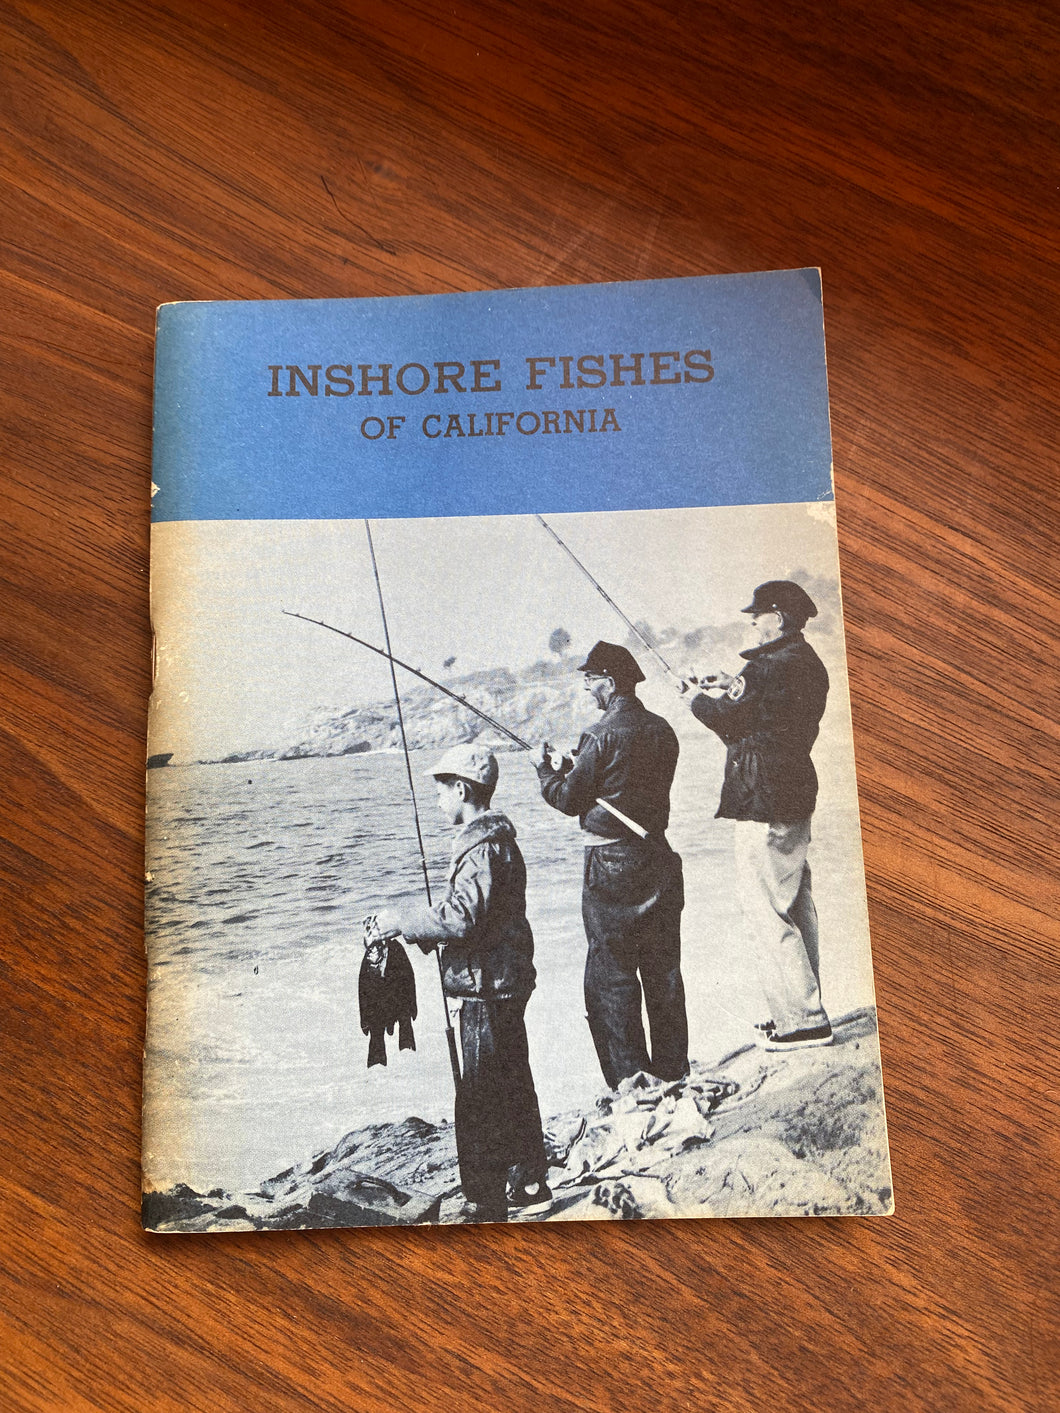 Inshore Fishes of California Book (1966)